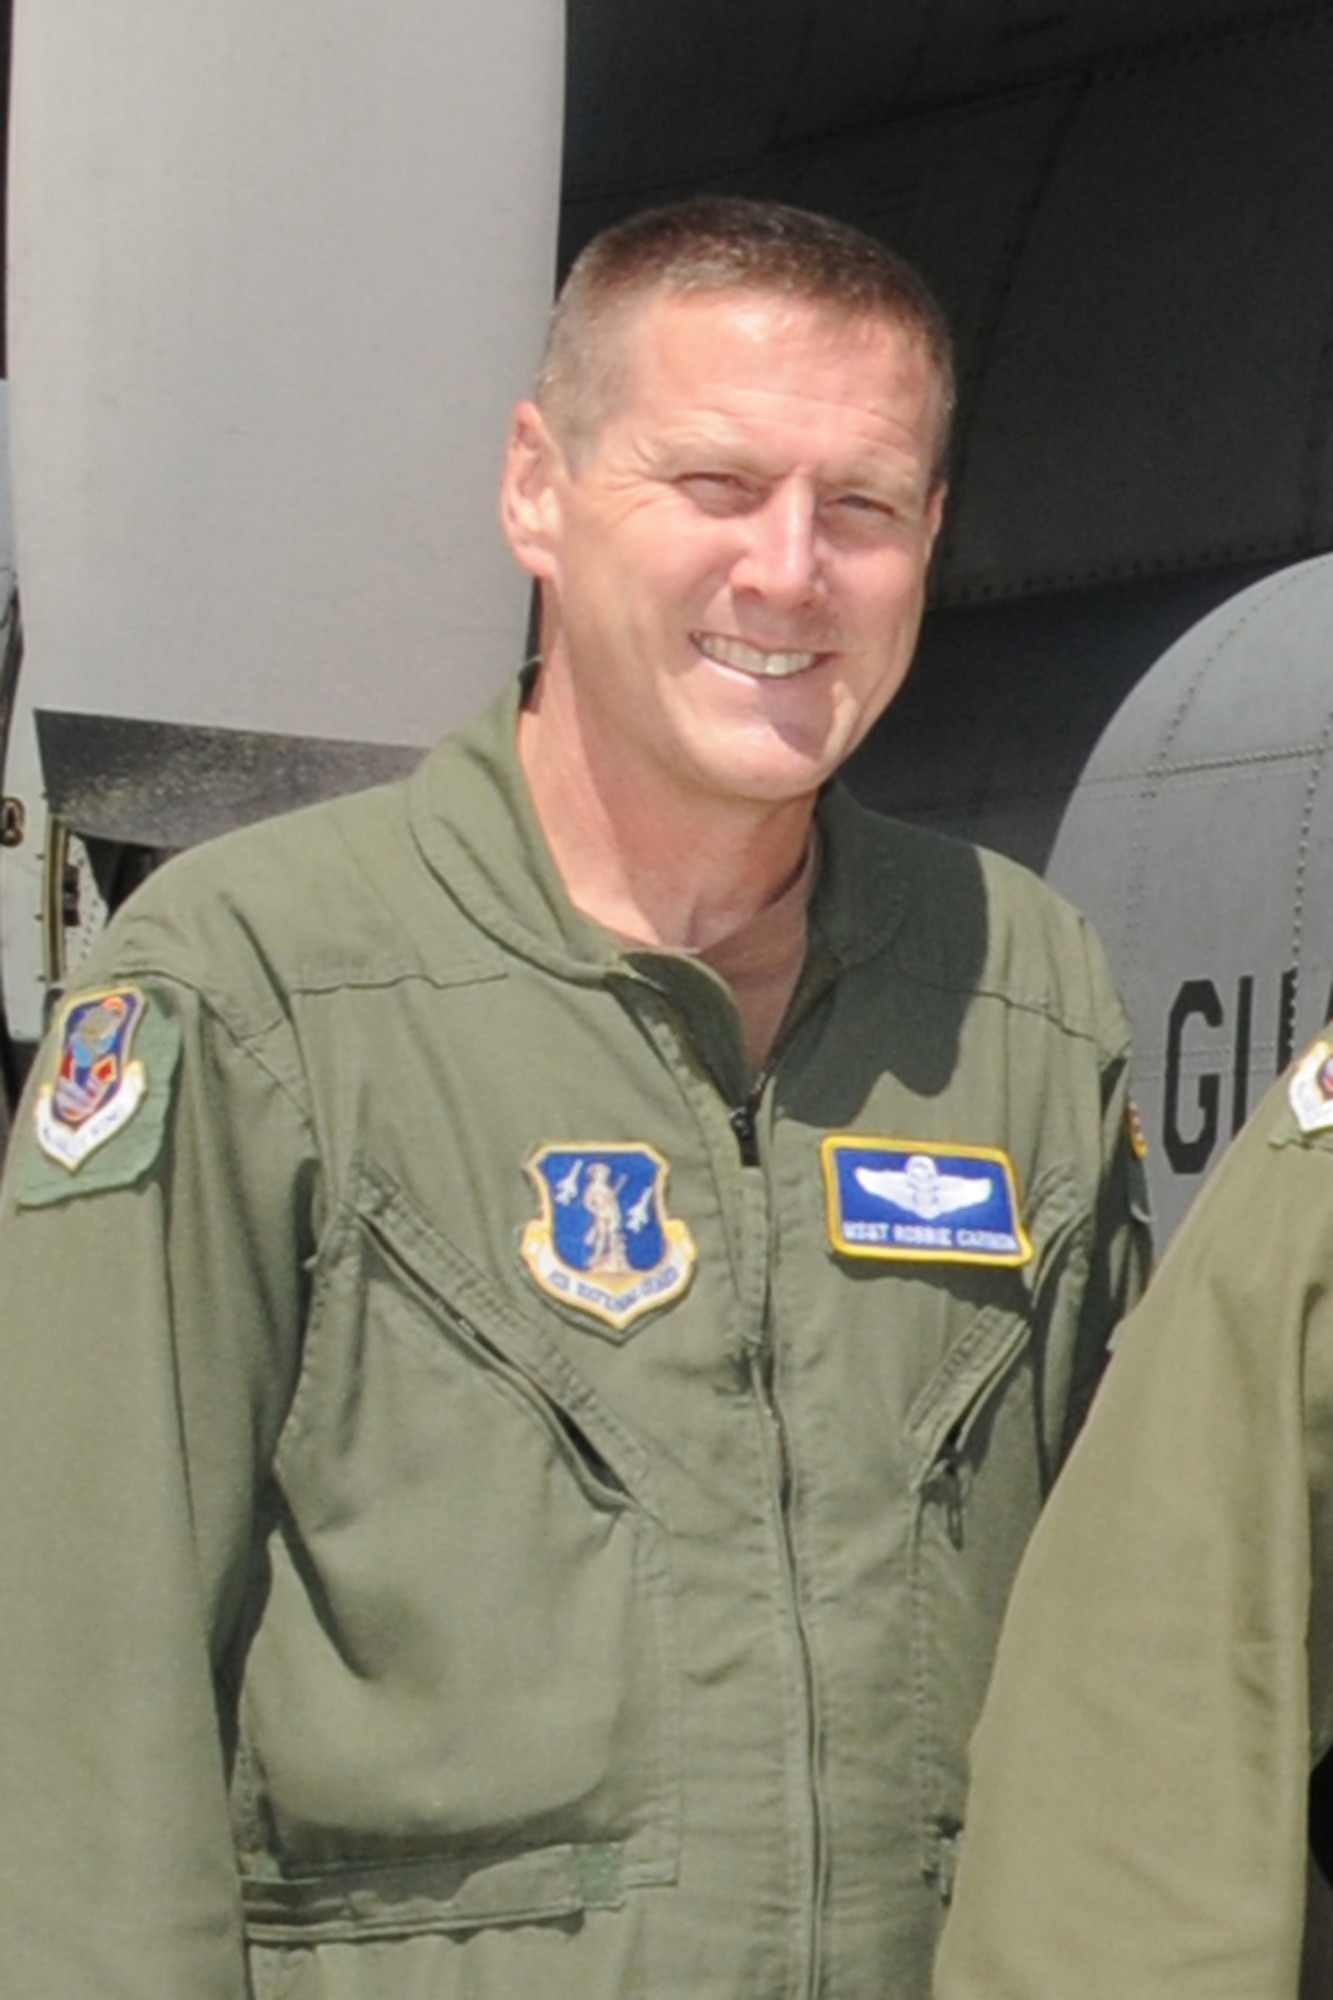 C-130 flight engineer Senior Master Sgt. Robert S. Cannon, one of 4 crew members who were killed July 1, 2012 after their C-130 crashed while fighting wildfires in South Dakota. (courtesy photo)
